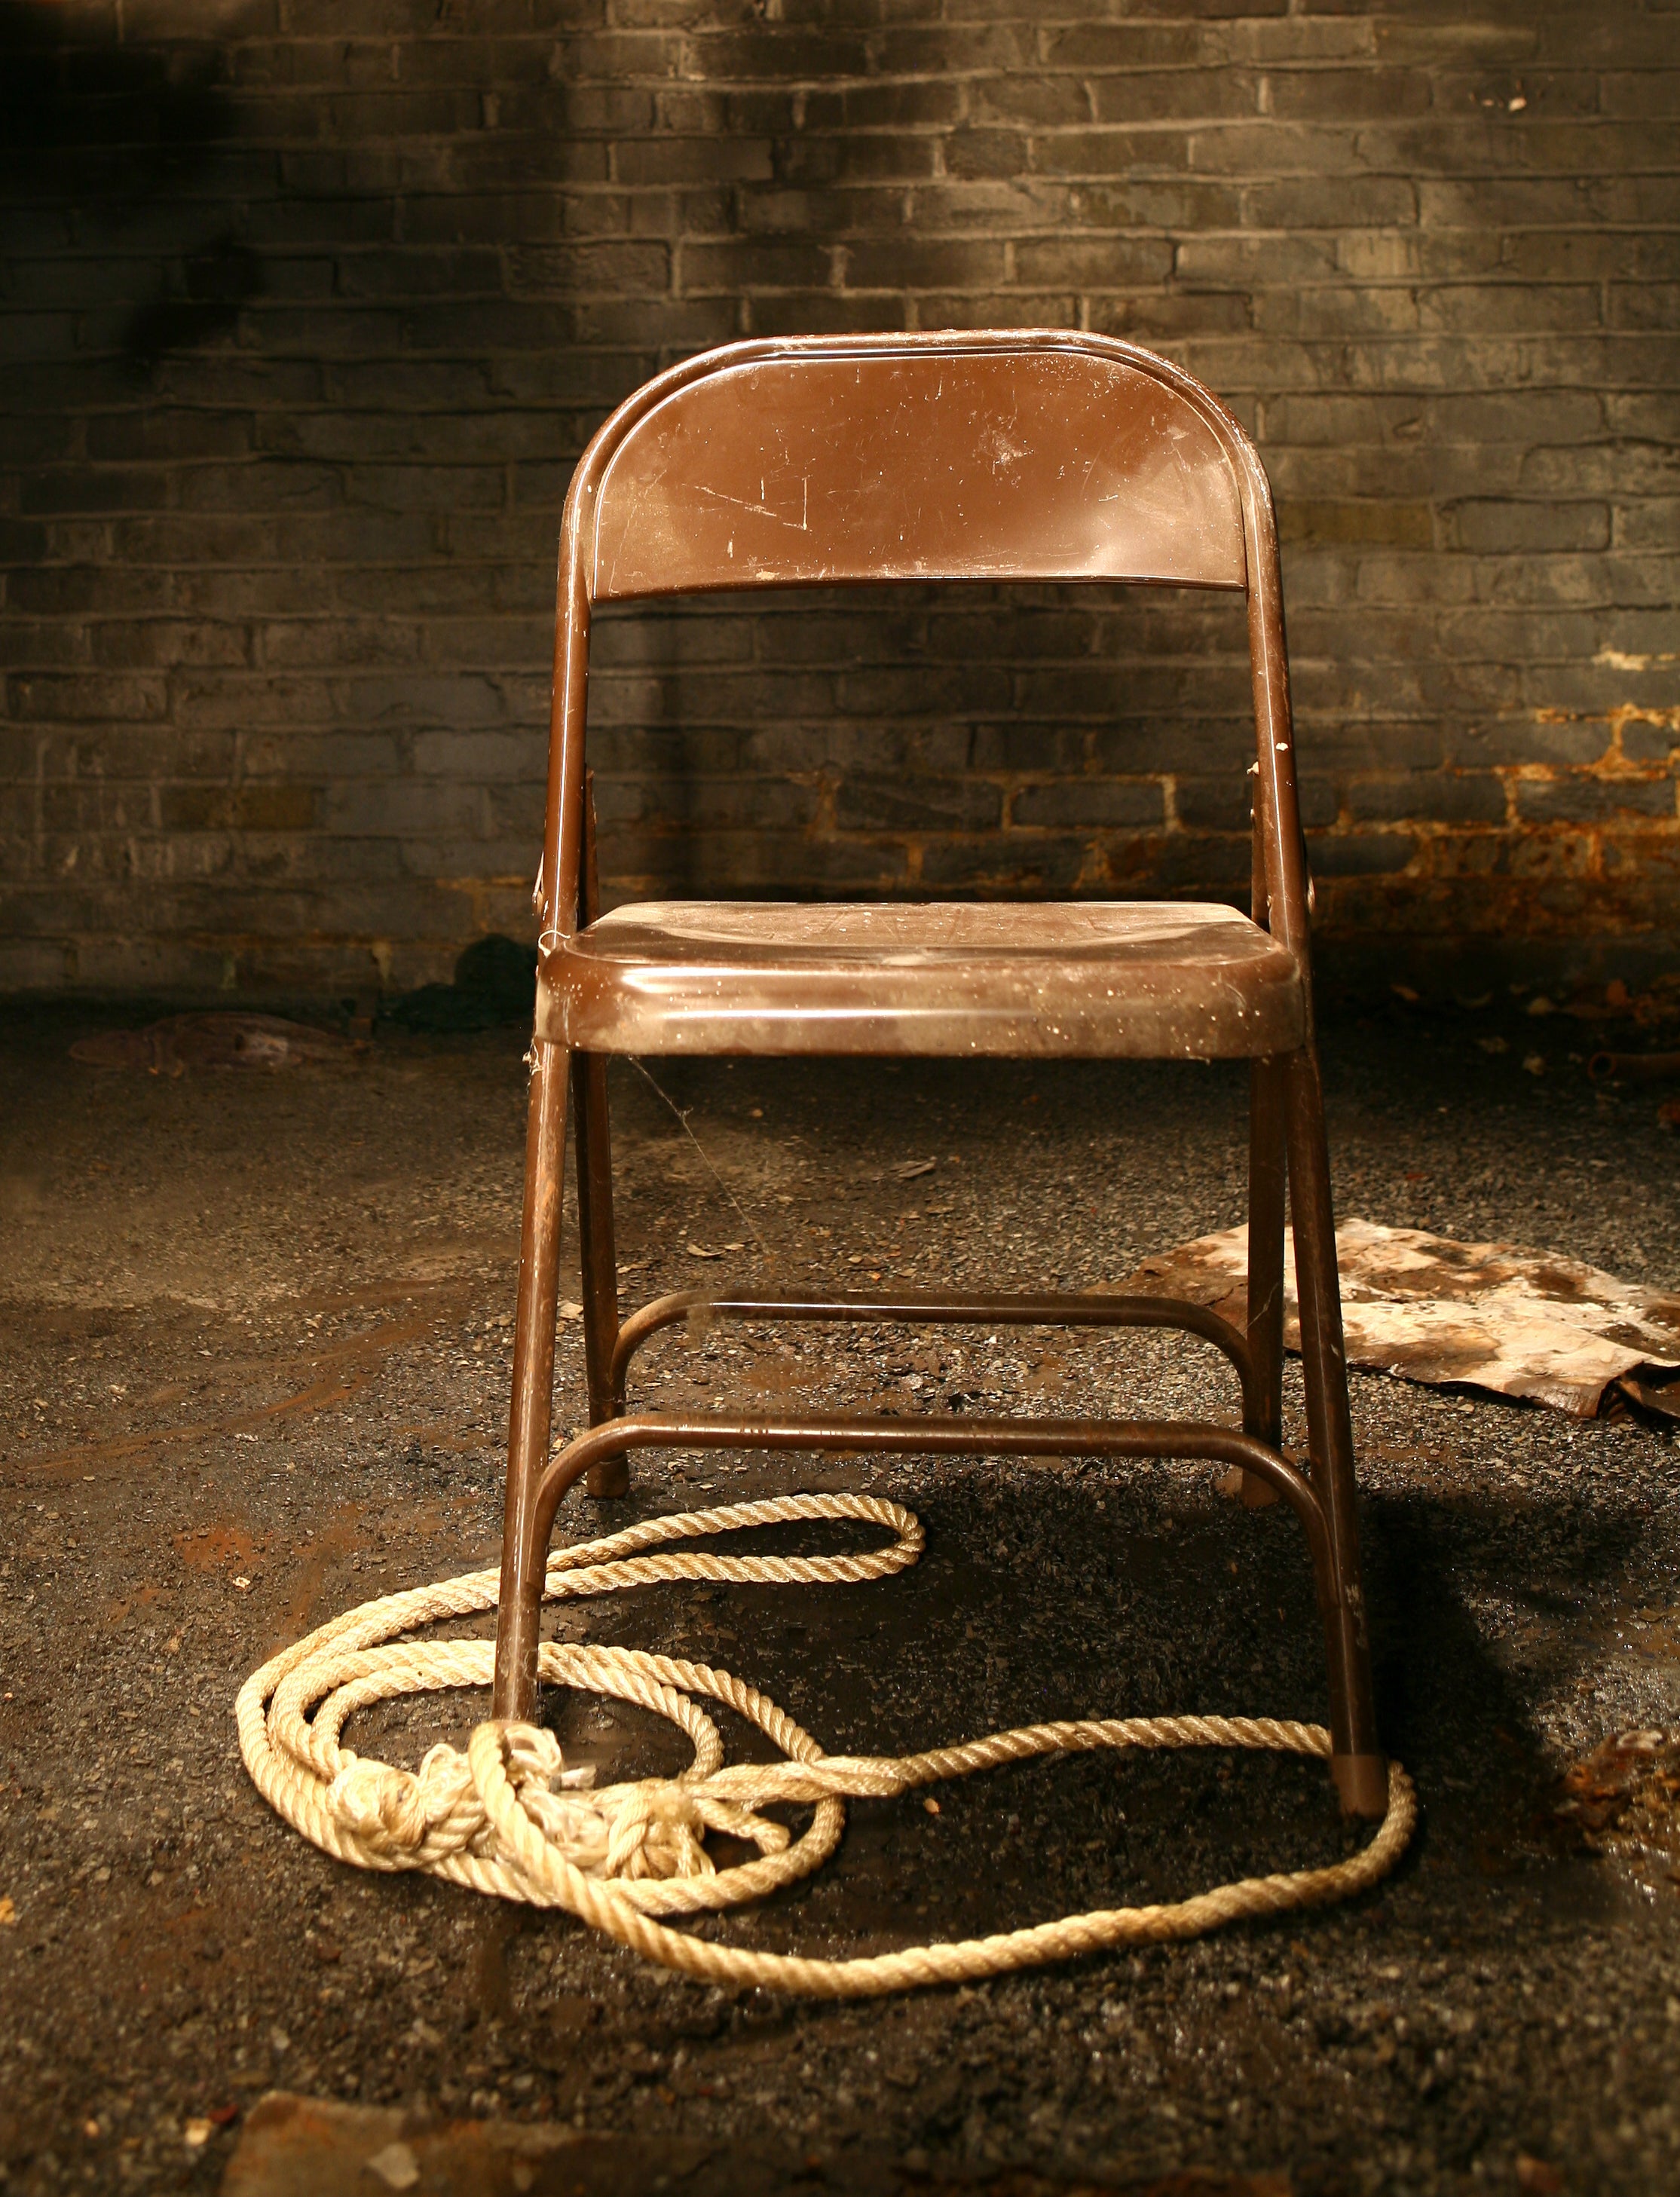 A chair with rope on the ground near it